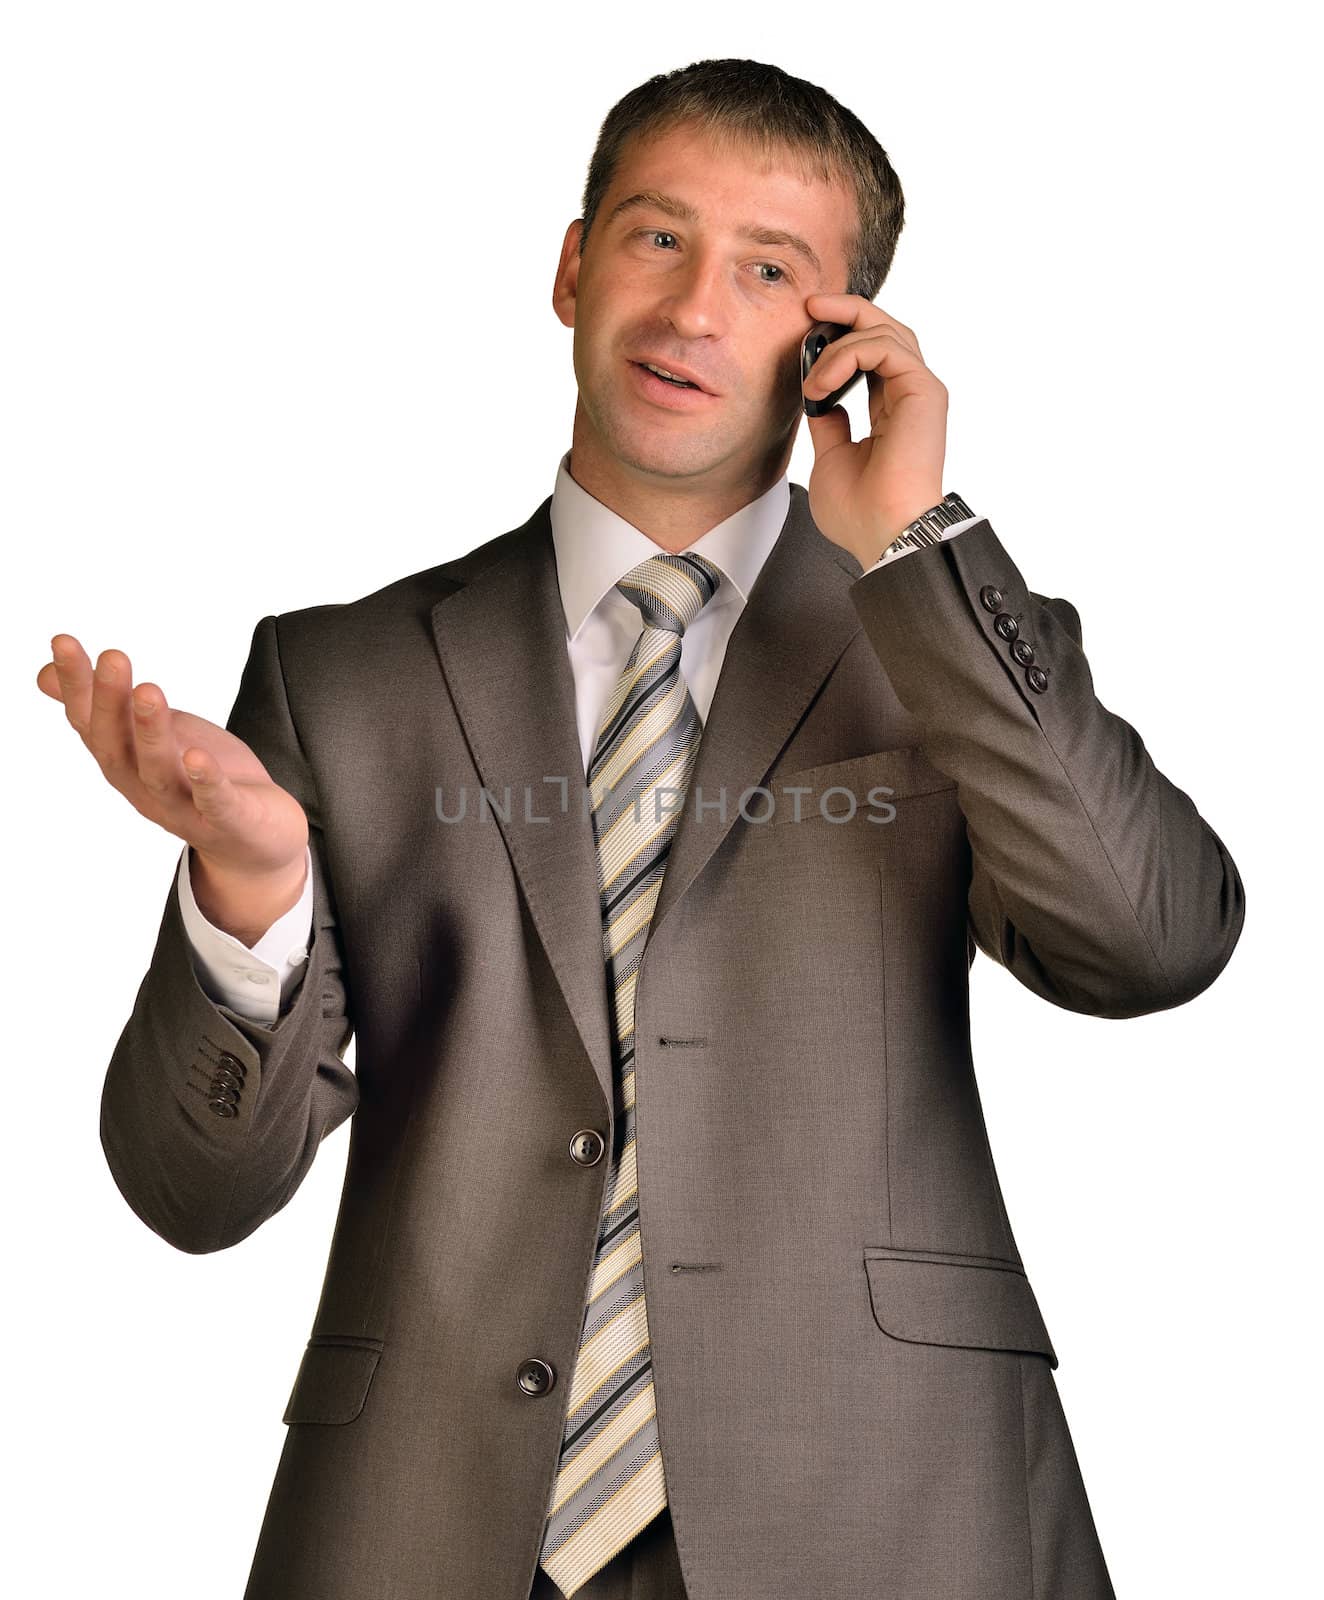 Close up of a laughing businessman on the phone. Isolated on white background